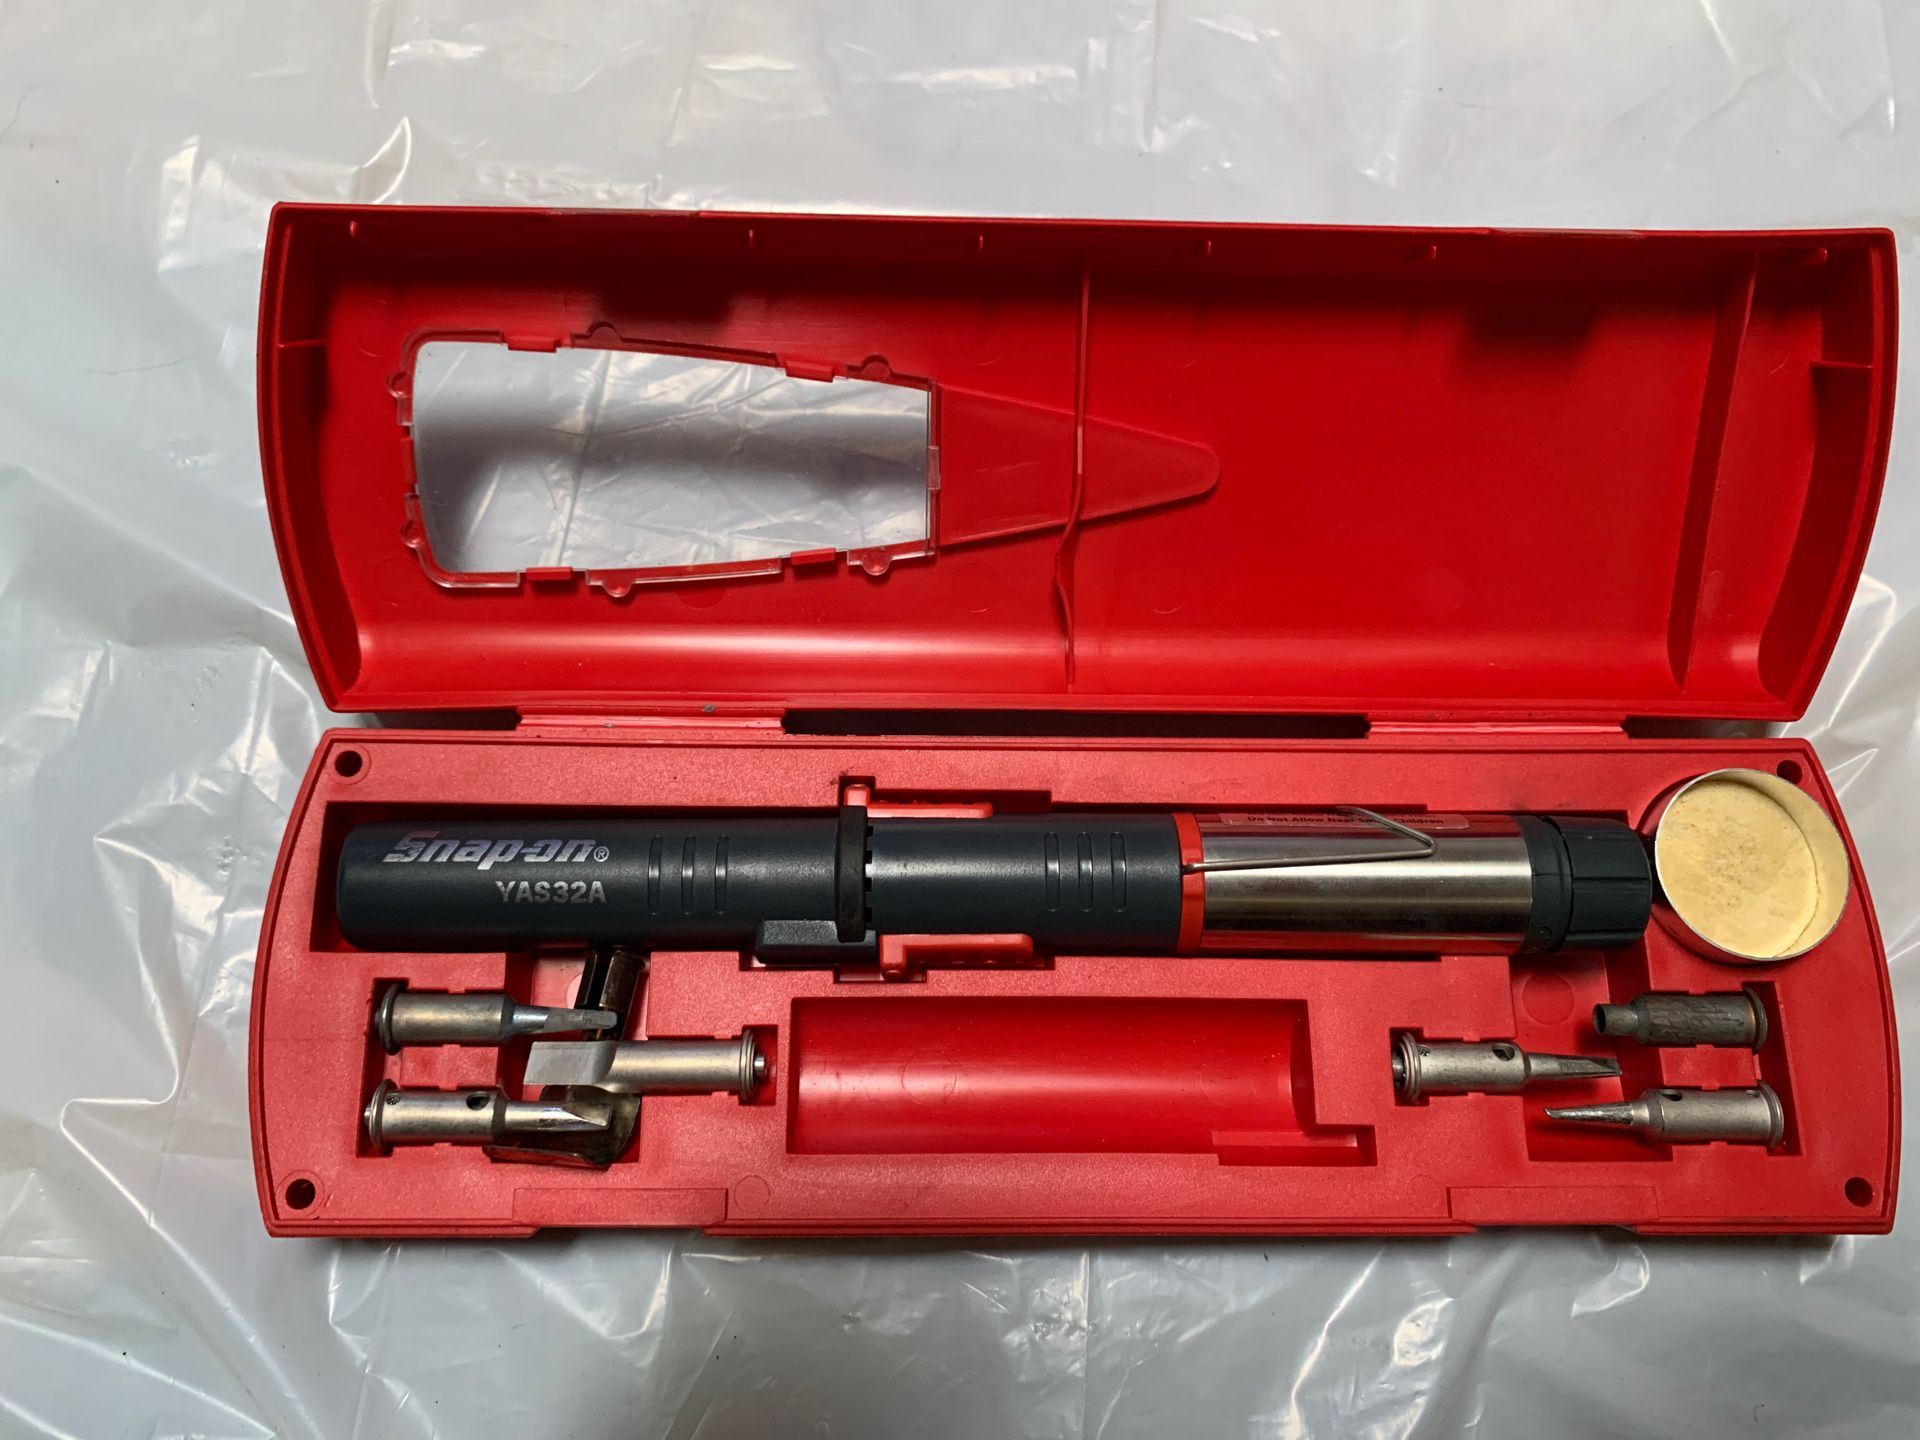 Snap On YAS32A Butane Soldering Iron